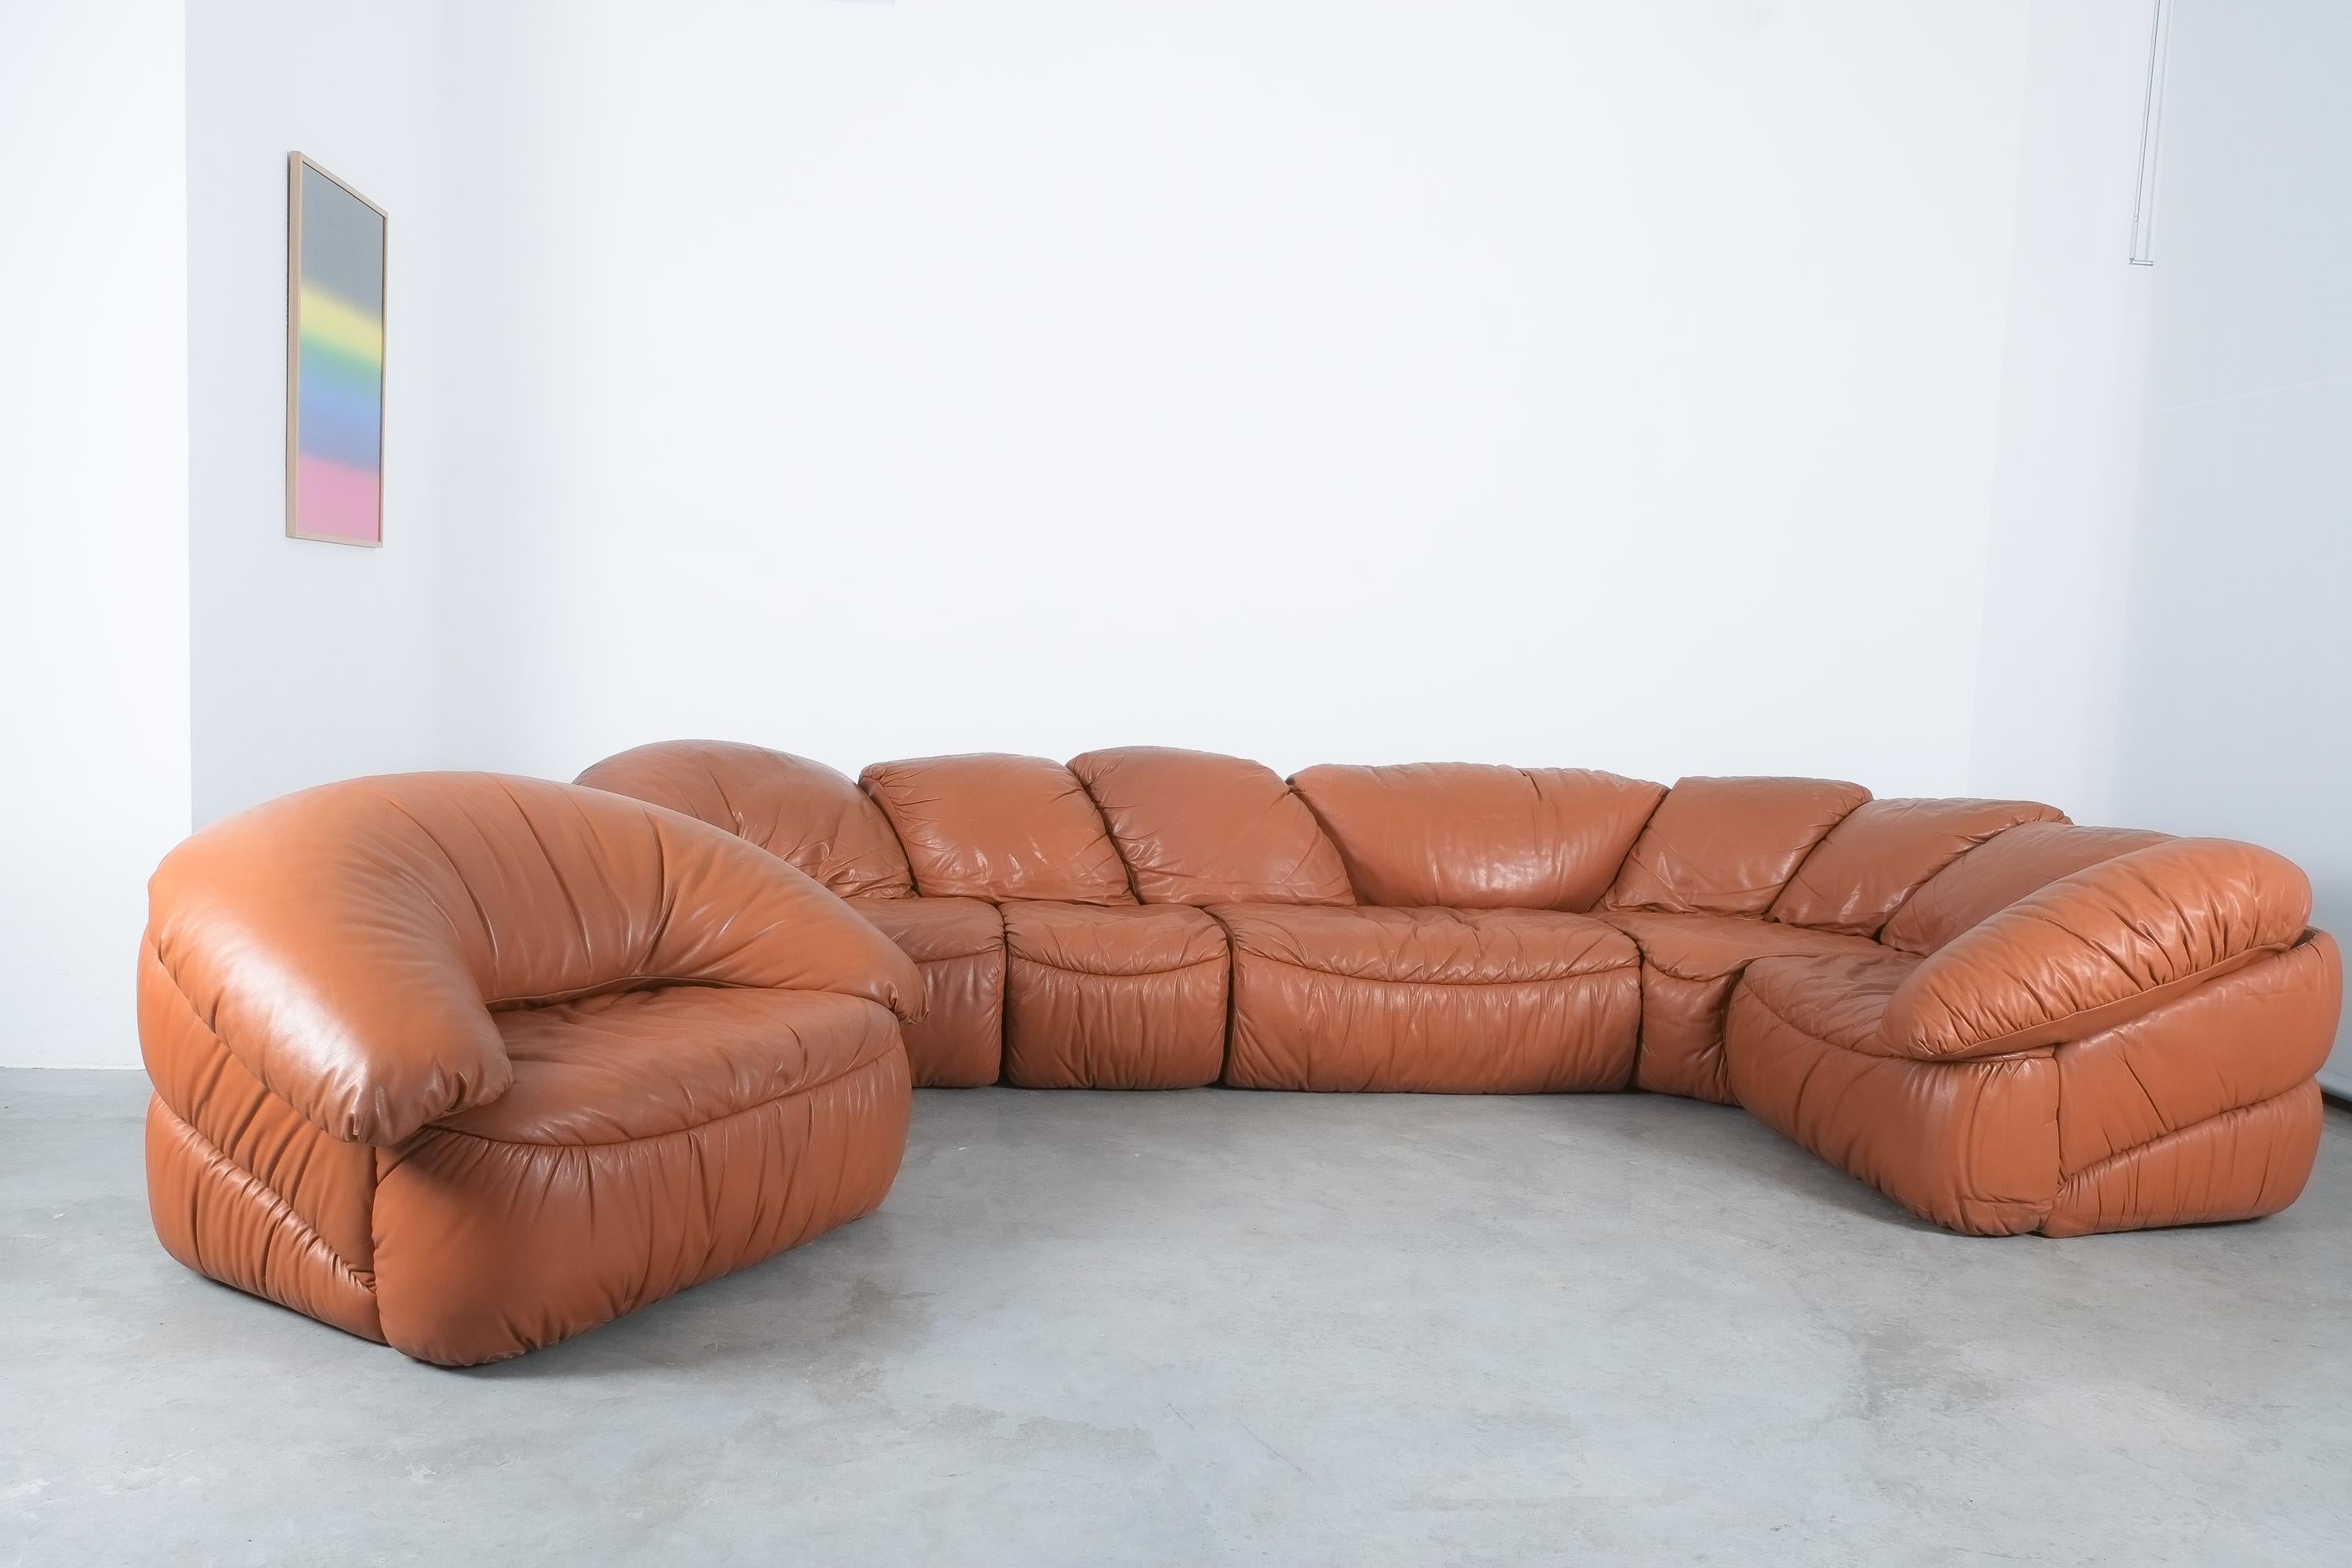 Late 20th Century Sectional Sofa Group by Wiener Werkstätten Brown Leather Croissant, Austria 1970